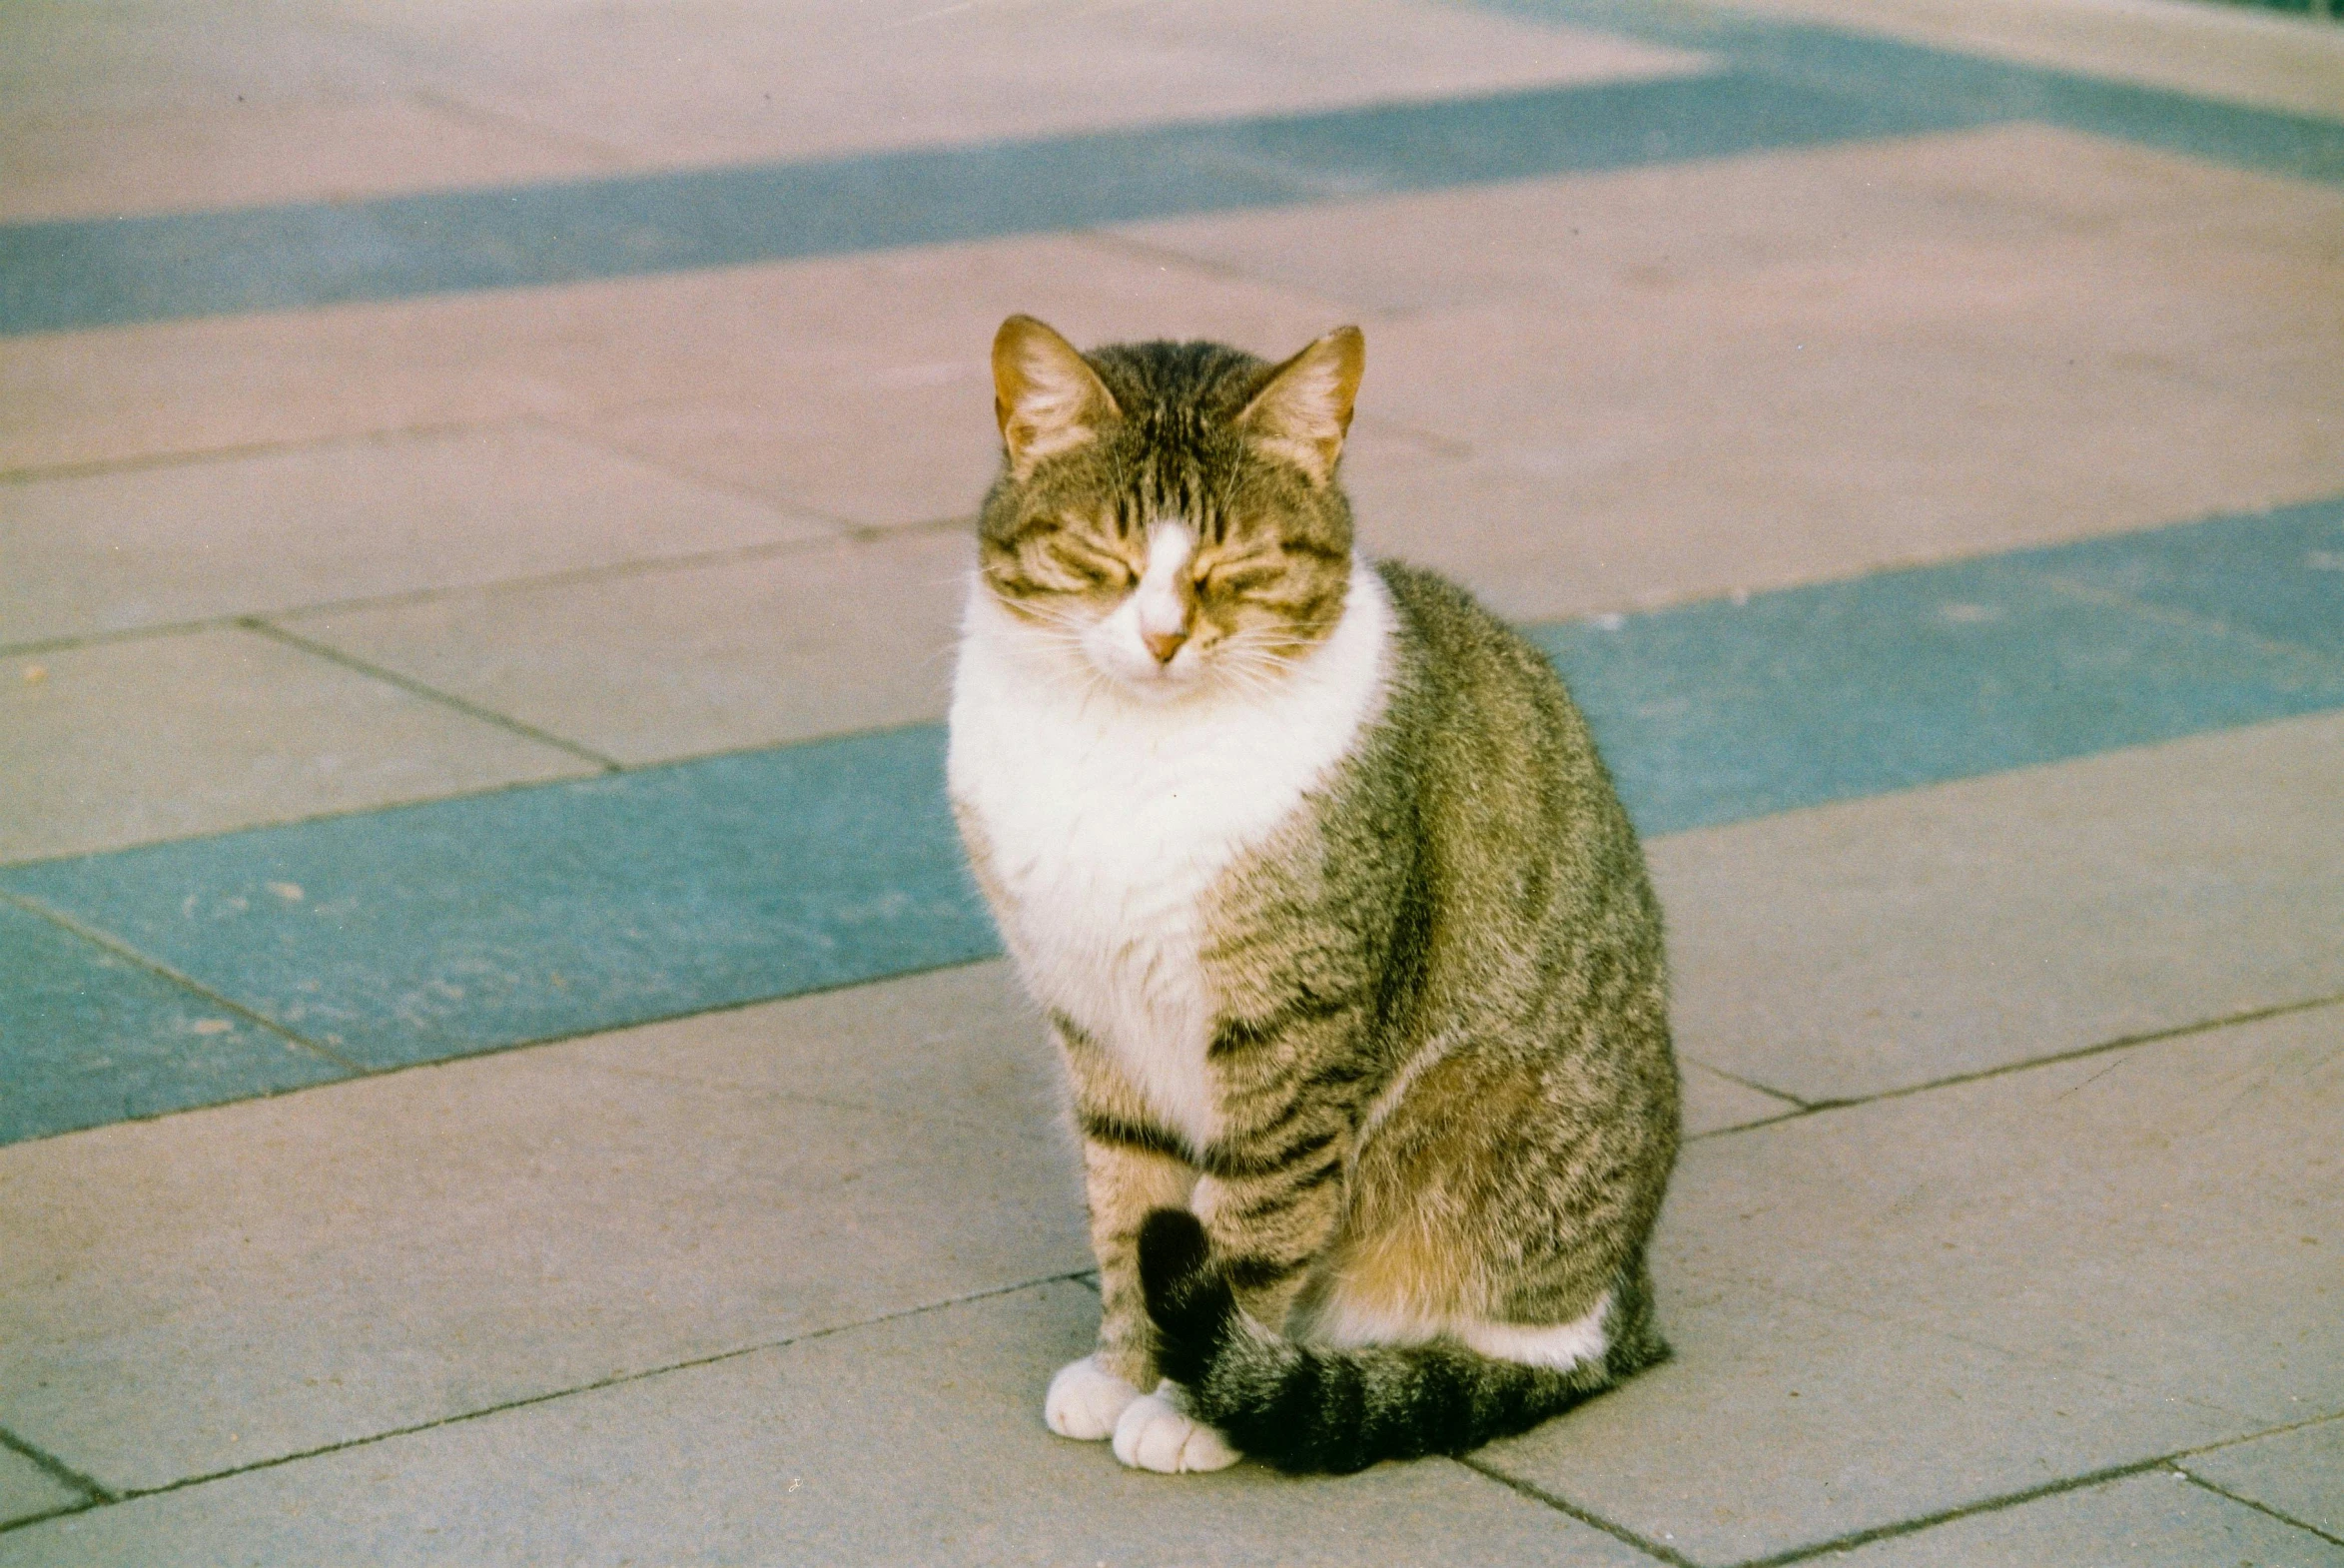 a cat sitting on the ground looking to its right